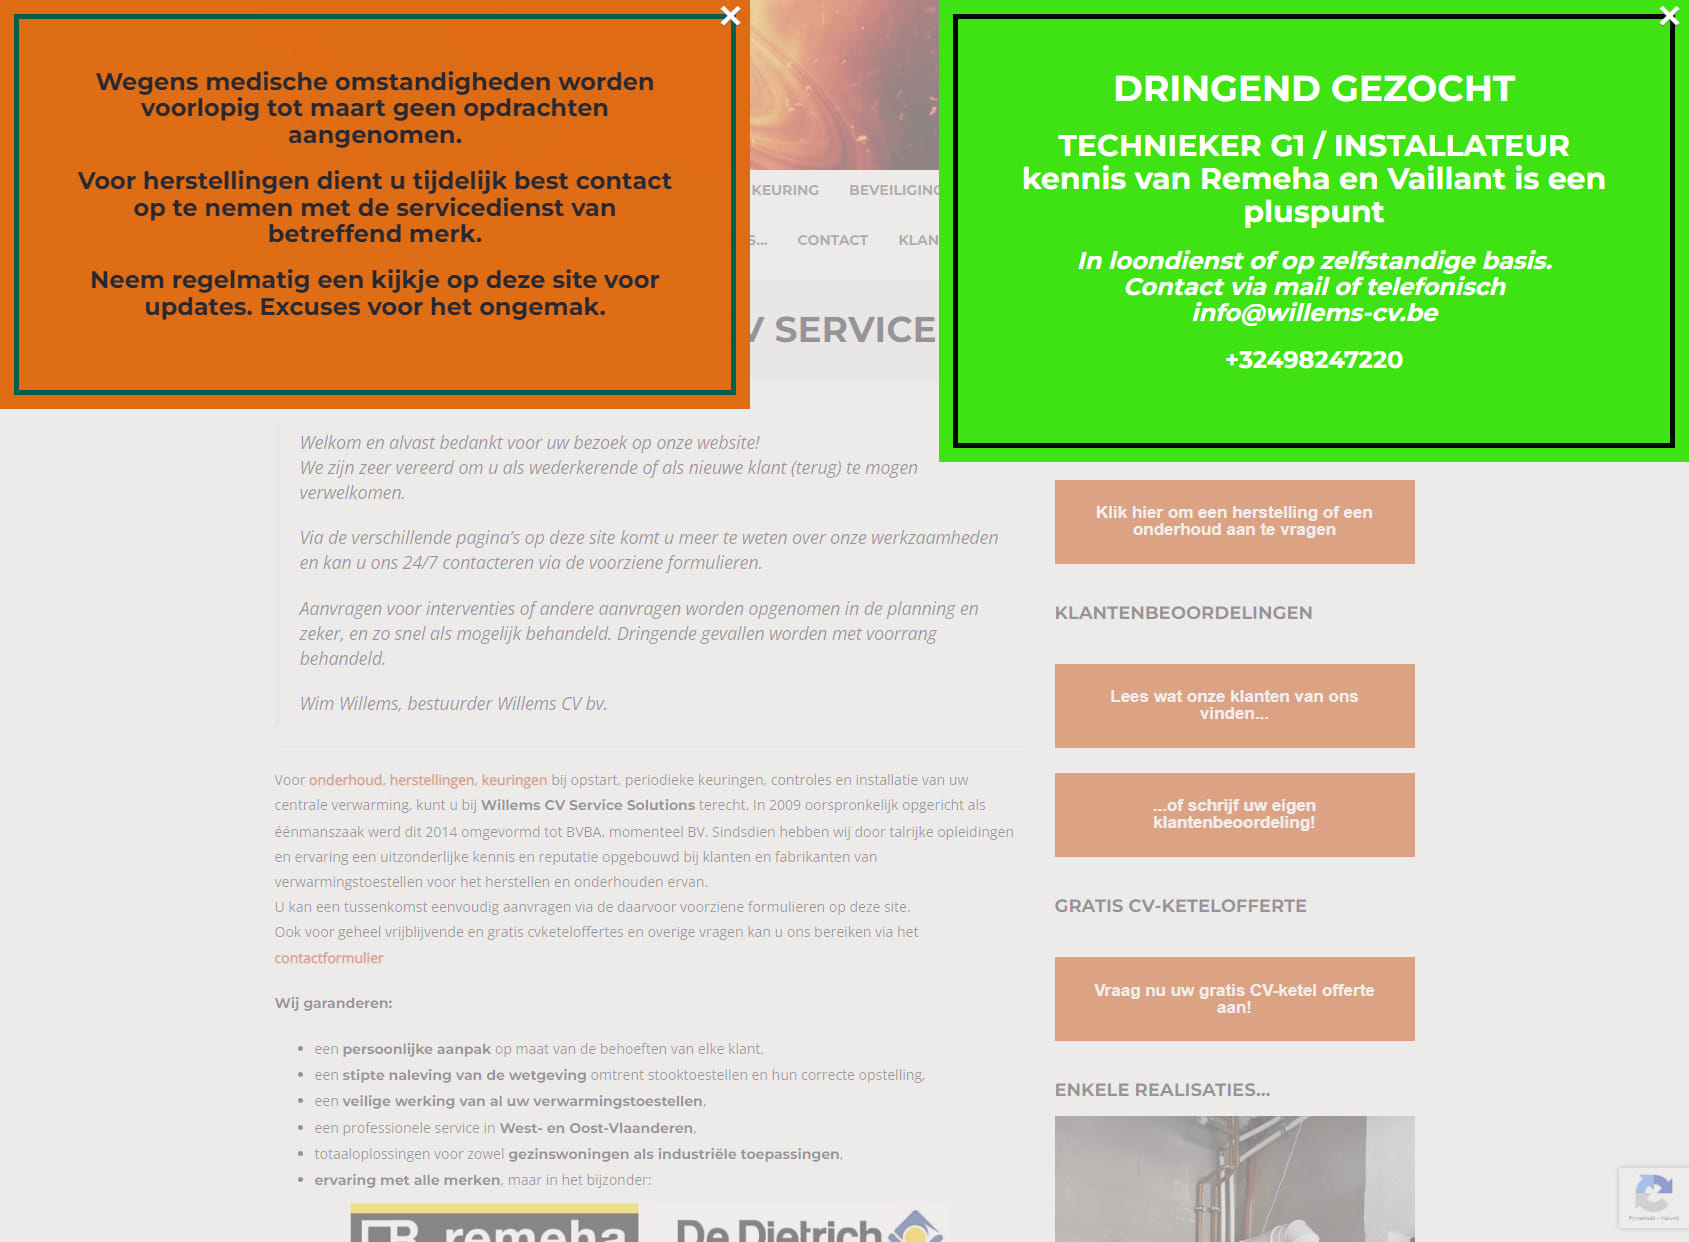 Willems CV Service Solutions